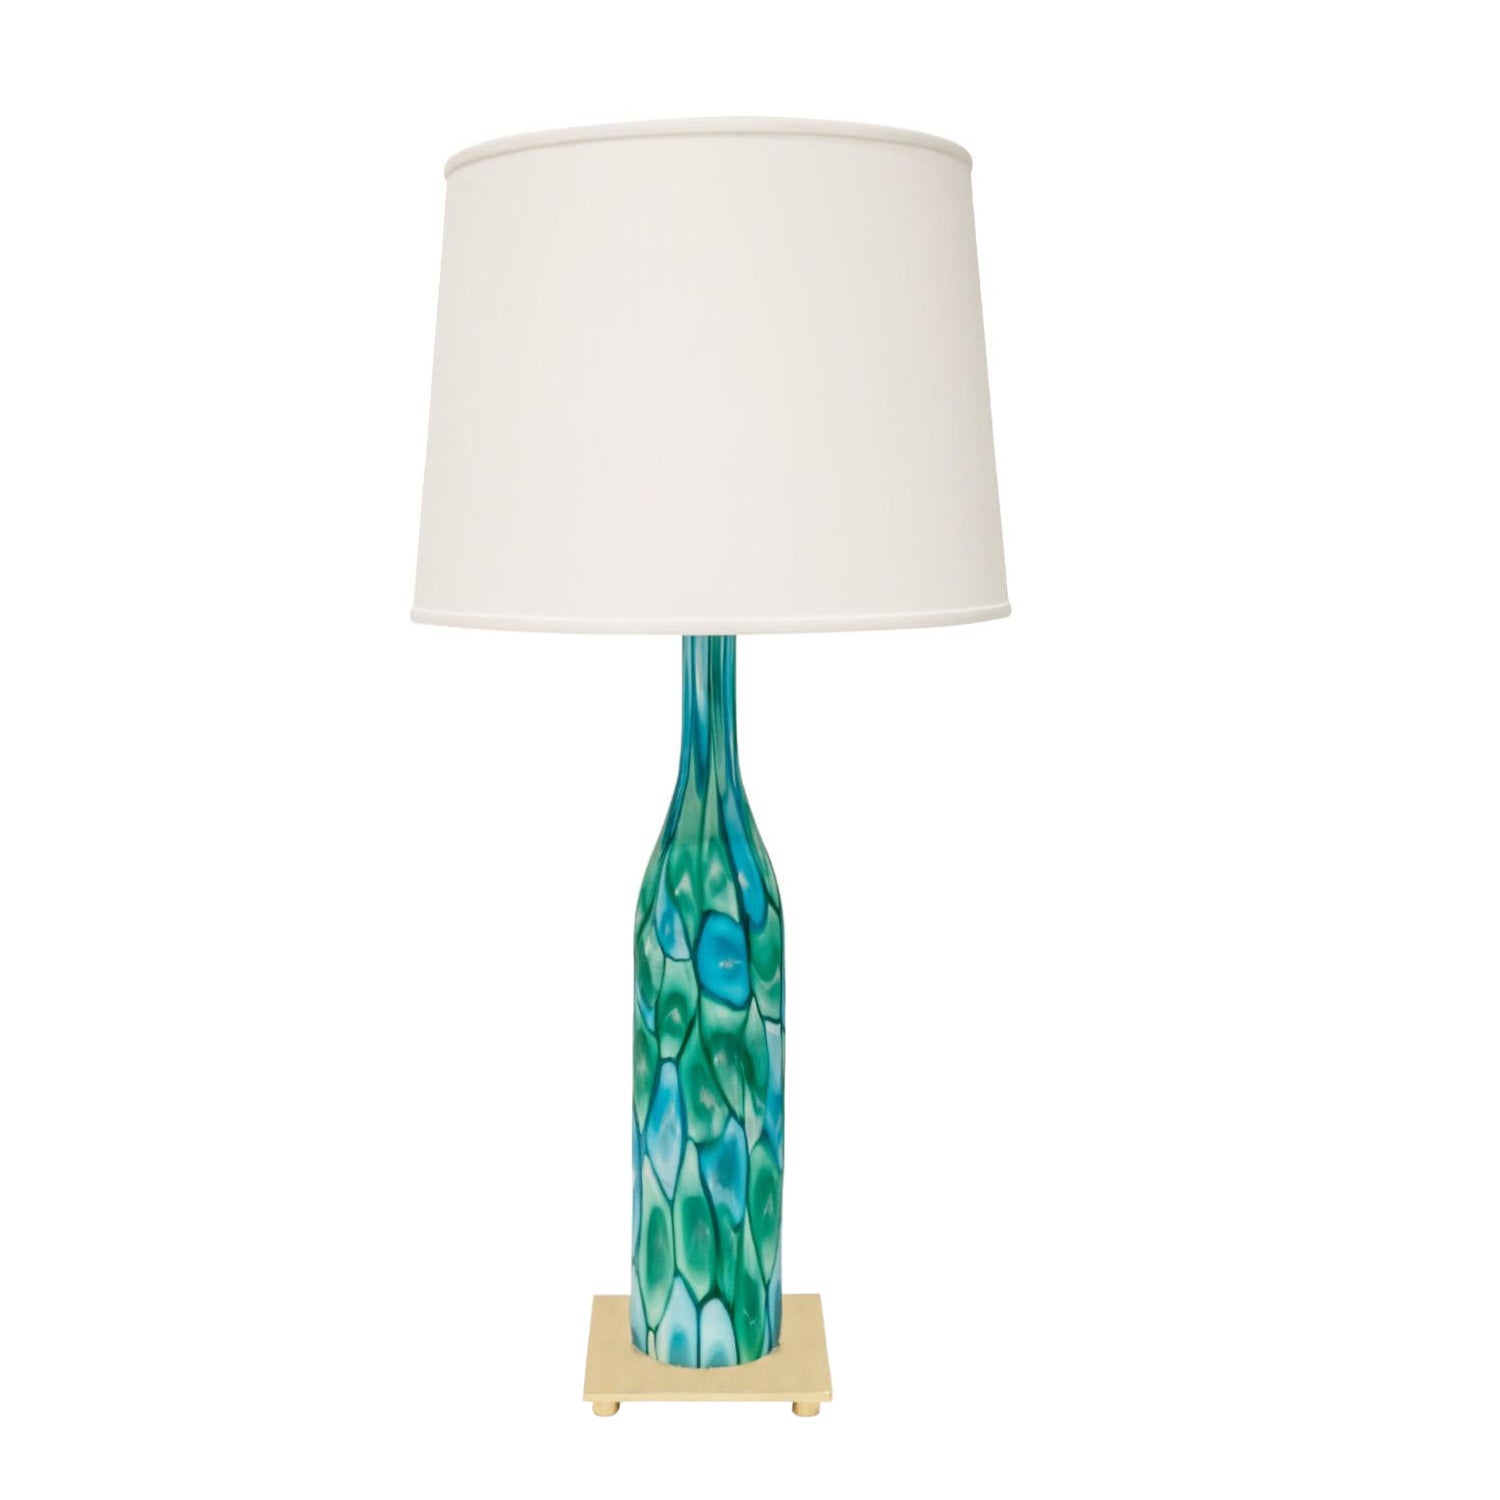 Fratelli Toso Art Glass Table Lamp with Green and Blue Murrhines, 1959